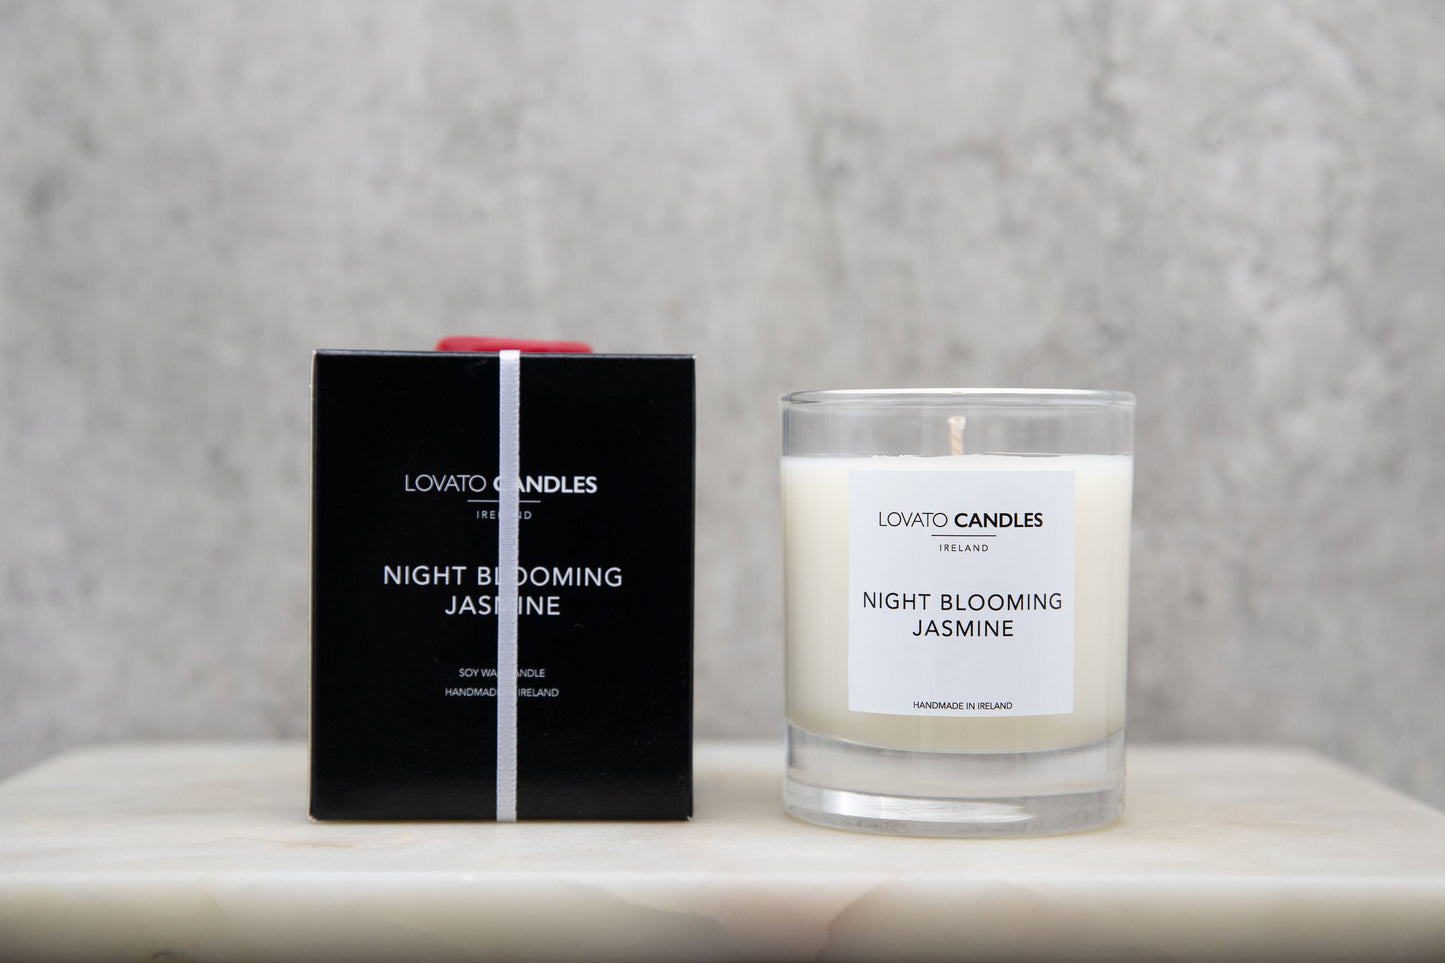 Clear Scented Candle with Luxury Black Box - Night Blooming Jasmine